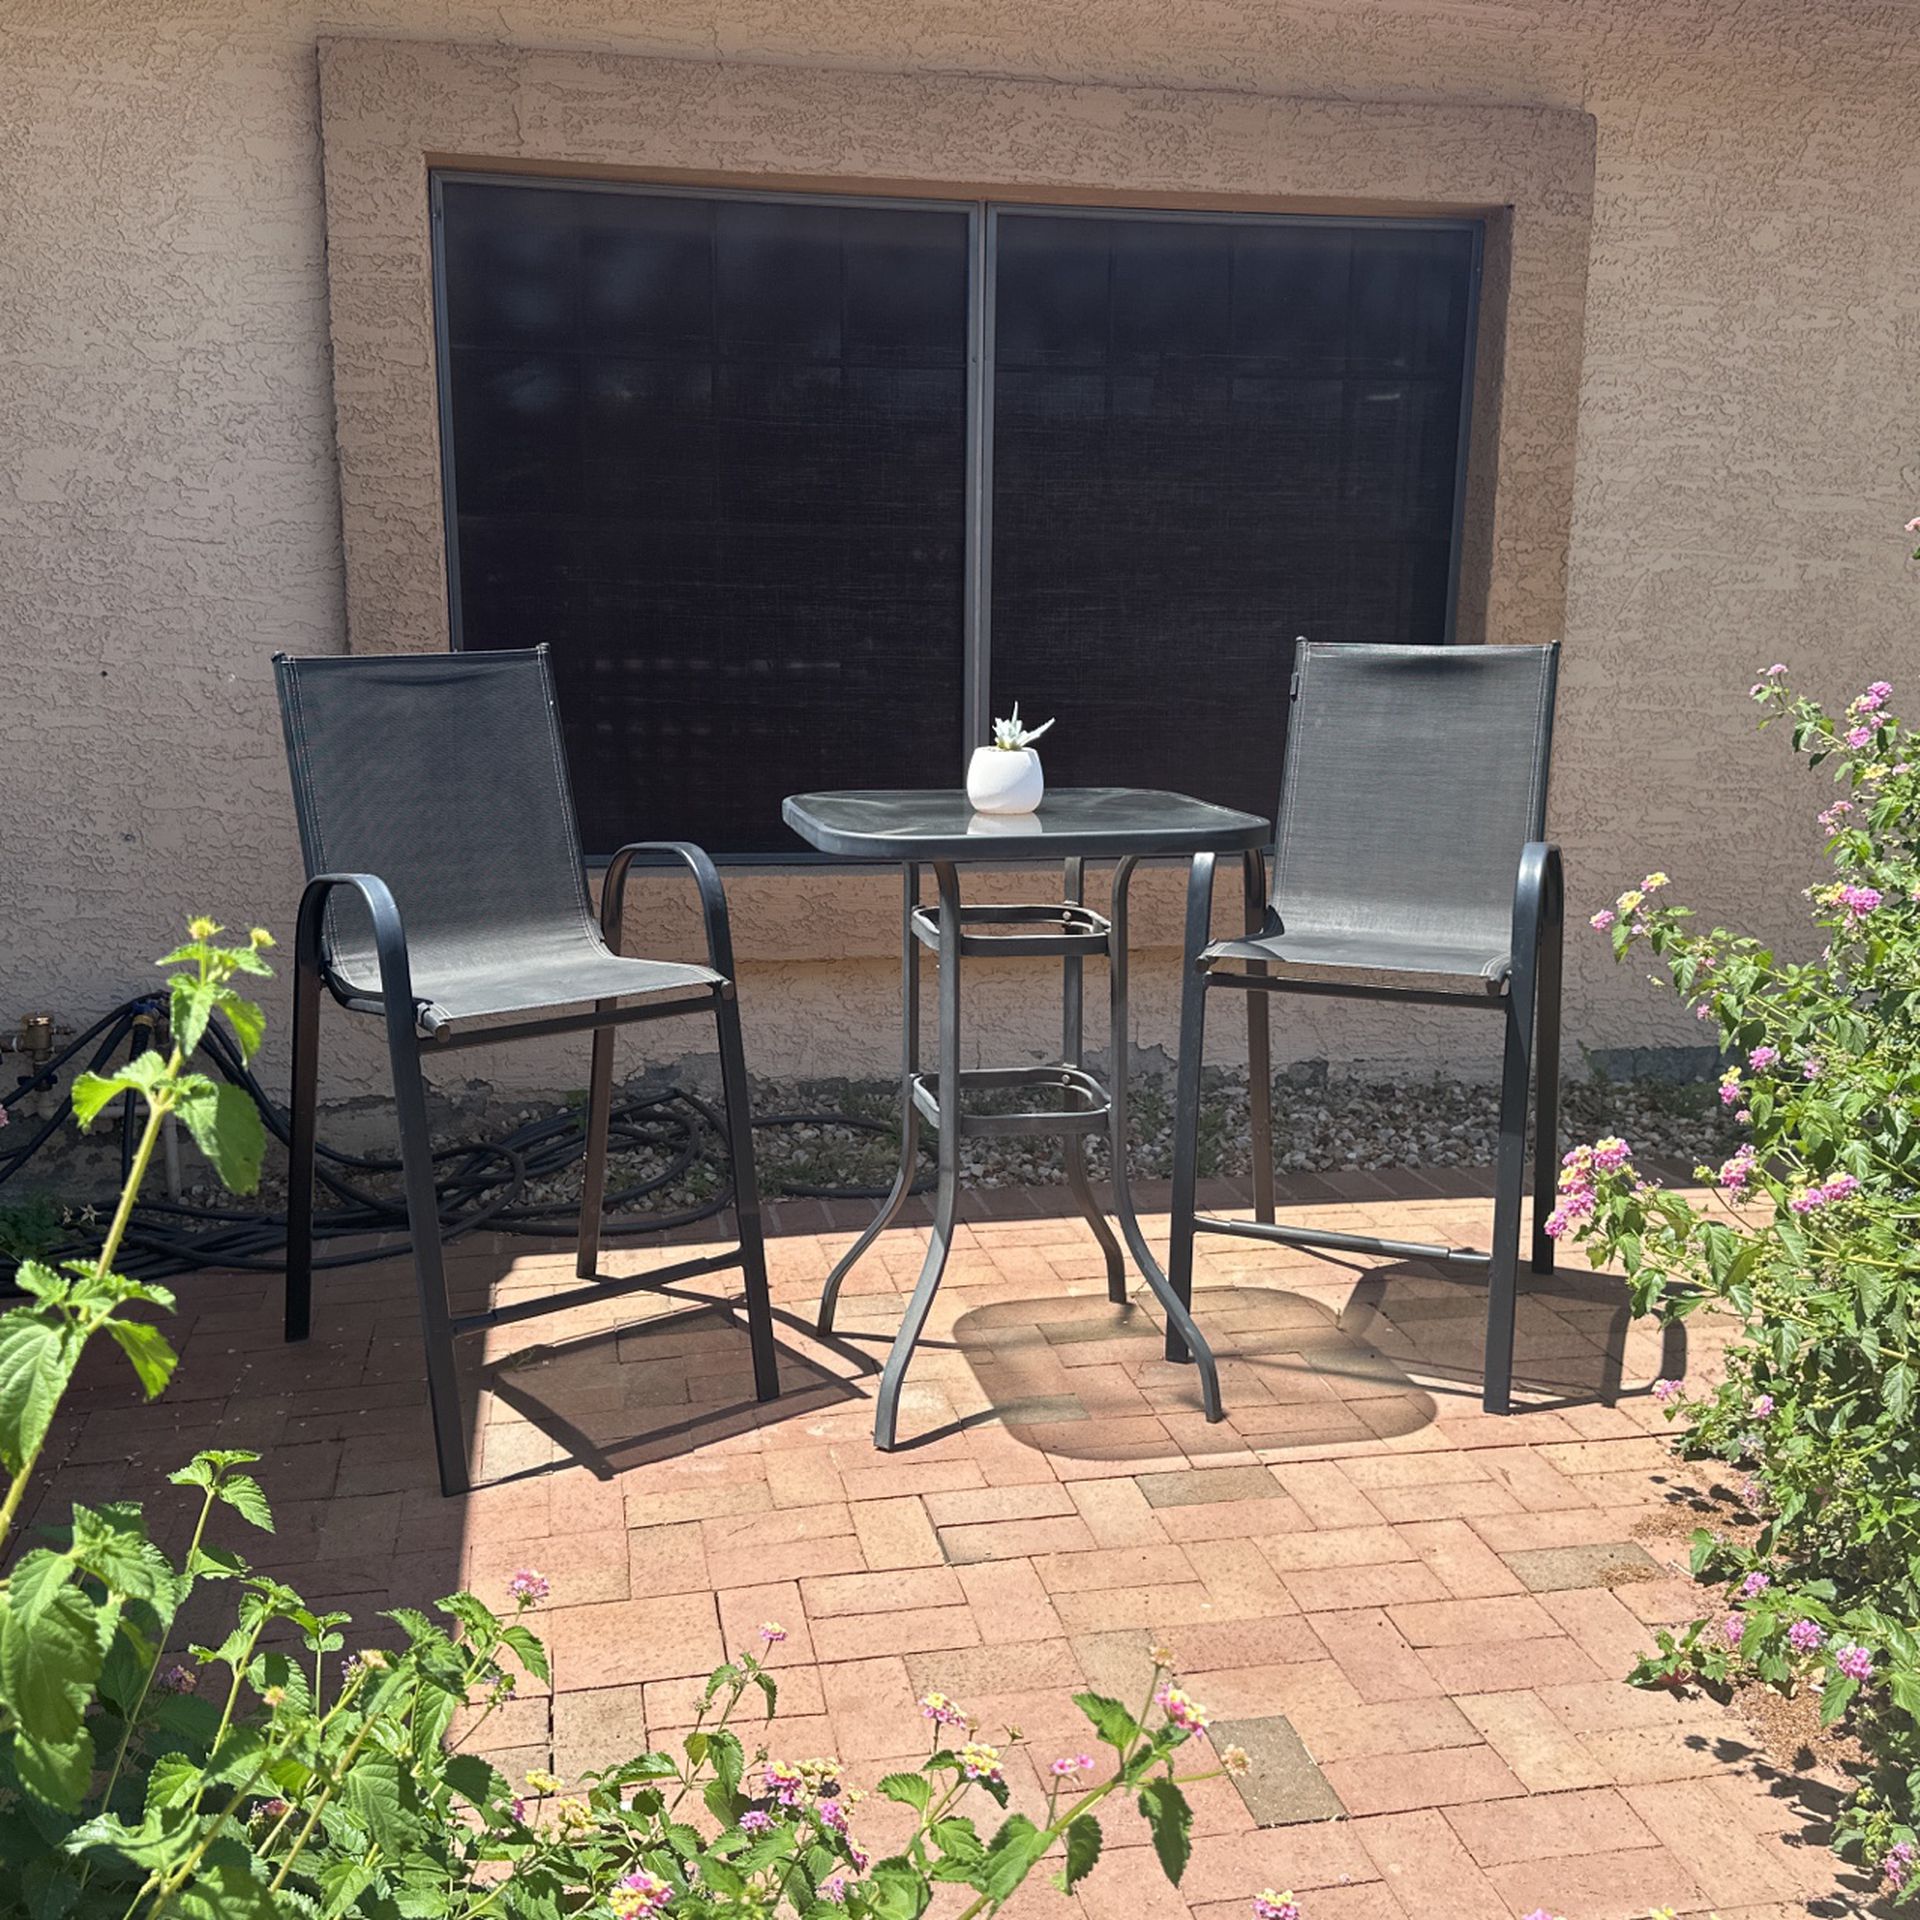 3 PC Patio  Set  From Homegoods